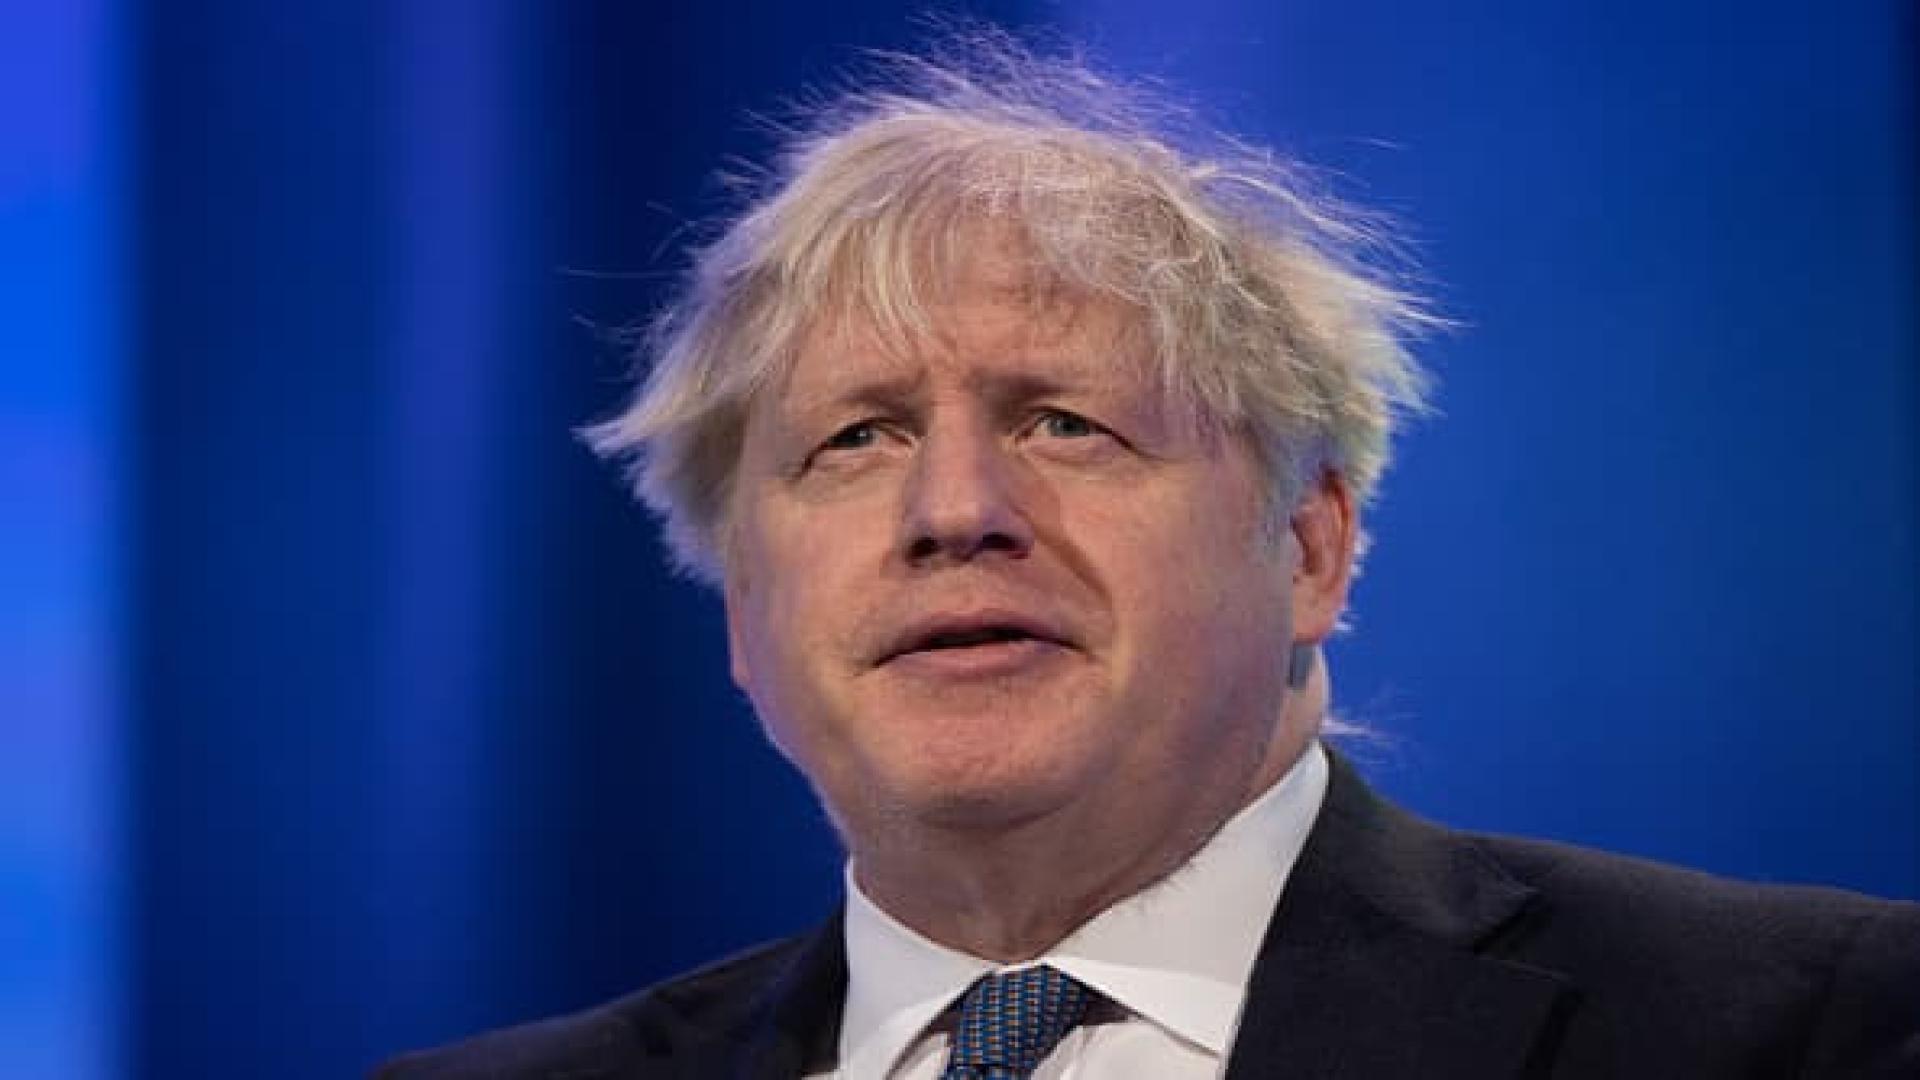 Ex-PM Boris Johnson deliberately misled UK parliament over parties during Covid, committee rules